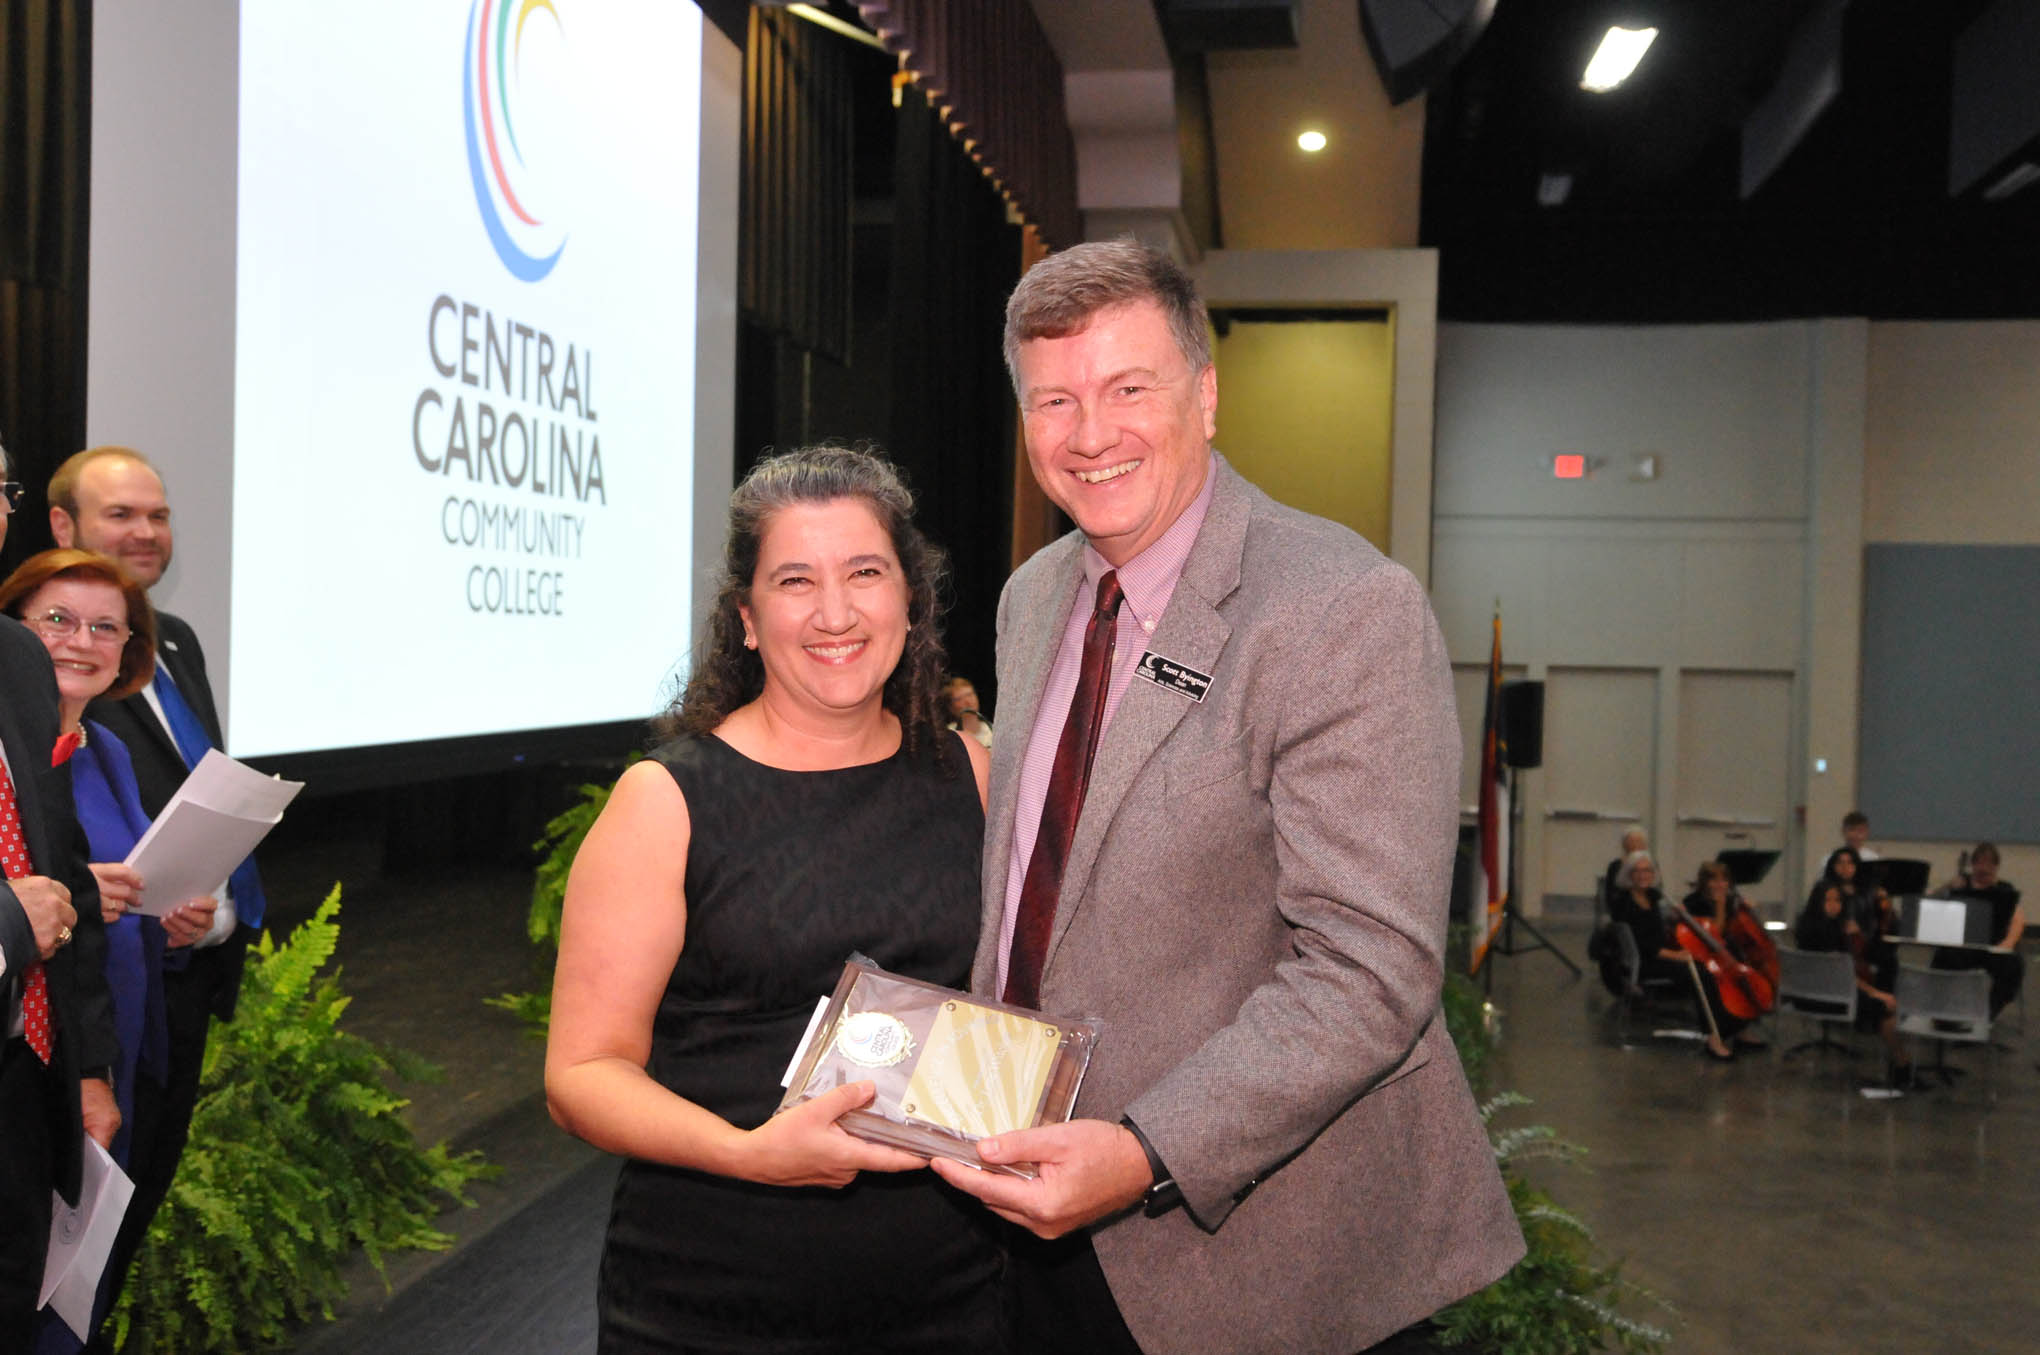 Click to enlarge,  Dr. Lora Witcher (left) receives the Central Carolina Community College Advisor of the Year award from Scott Byington (right), CCCC Dean of Arts, Sciences and Advising, during the Convocation and Installation of Dr. Lisa M. Chapman as Sixth President of CCCC on Sept. 26. 